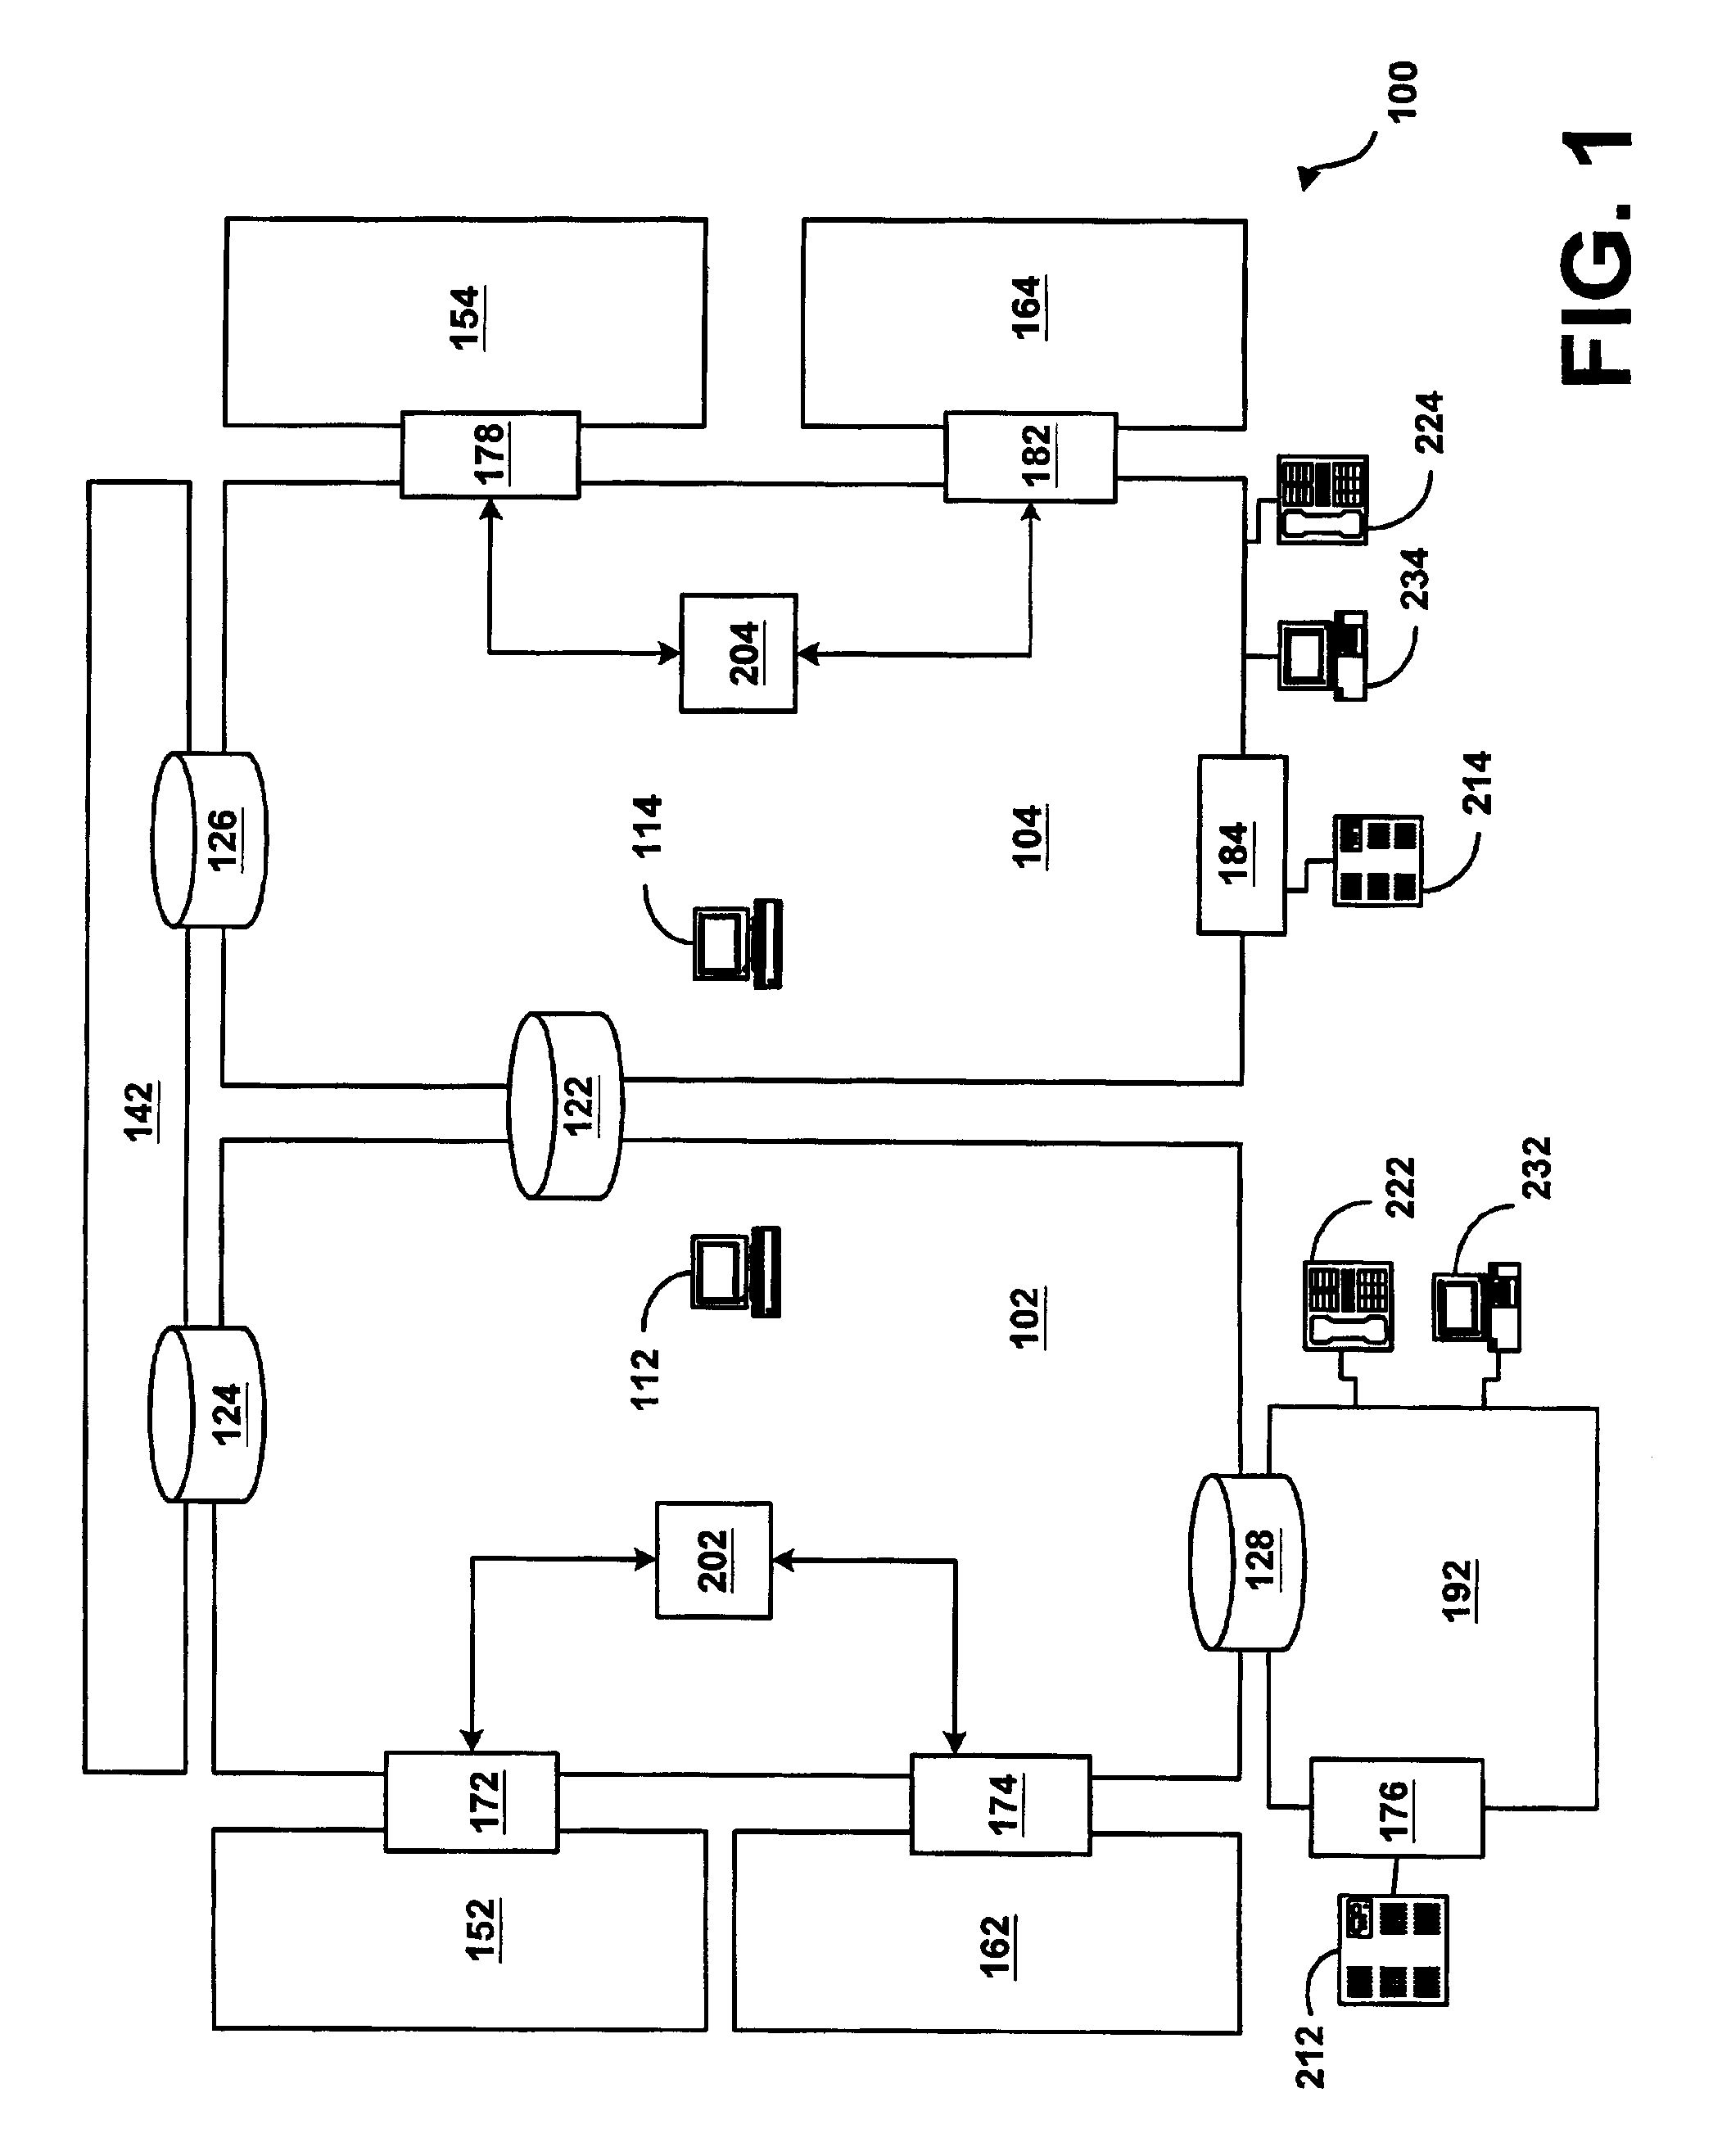 System and method for assisting in controlling real-time transport protocol flow through multiple networks via use of a cluster of session routers